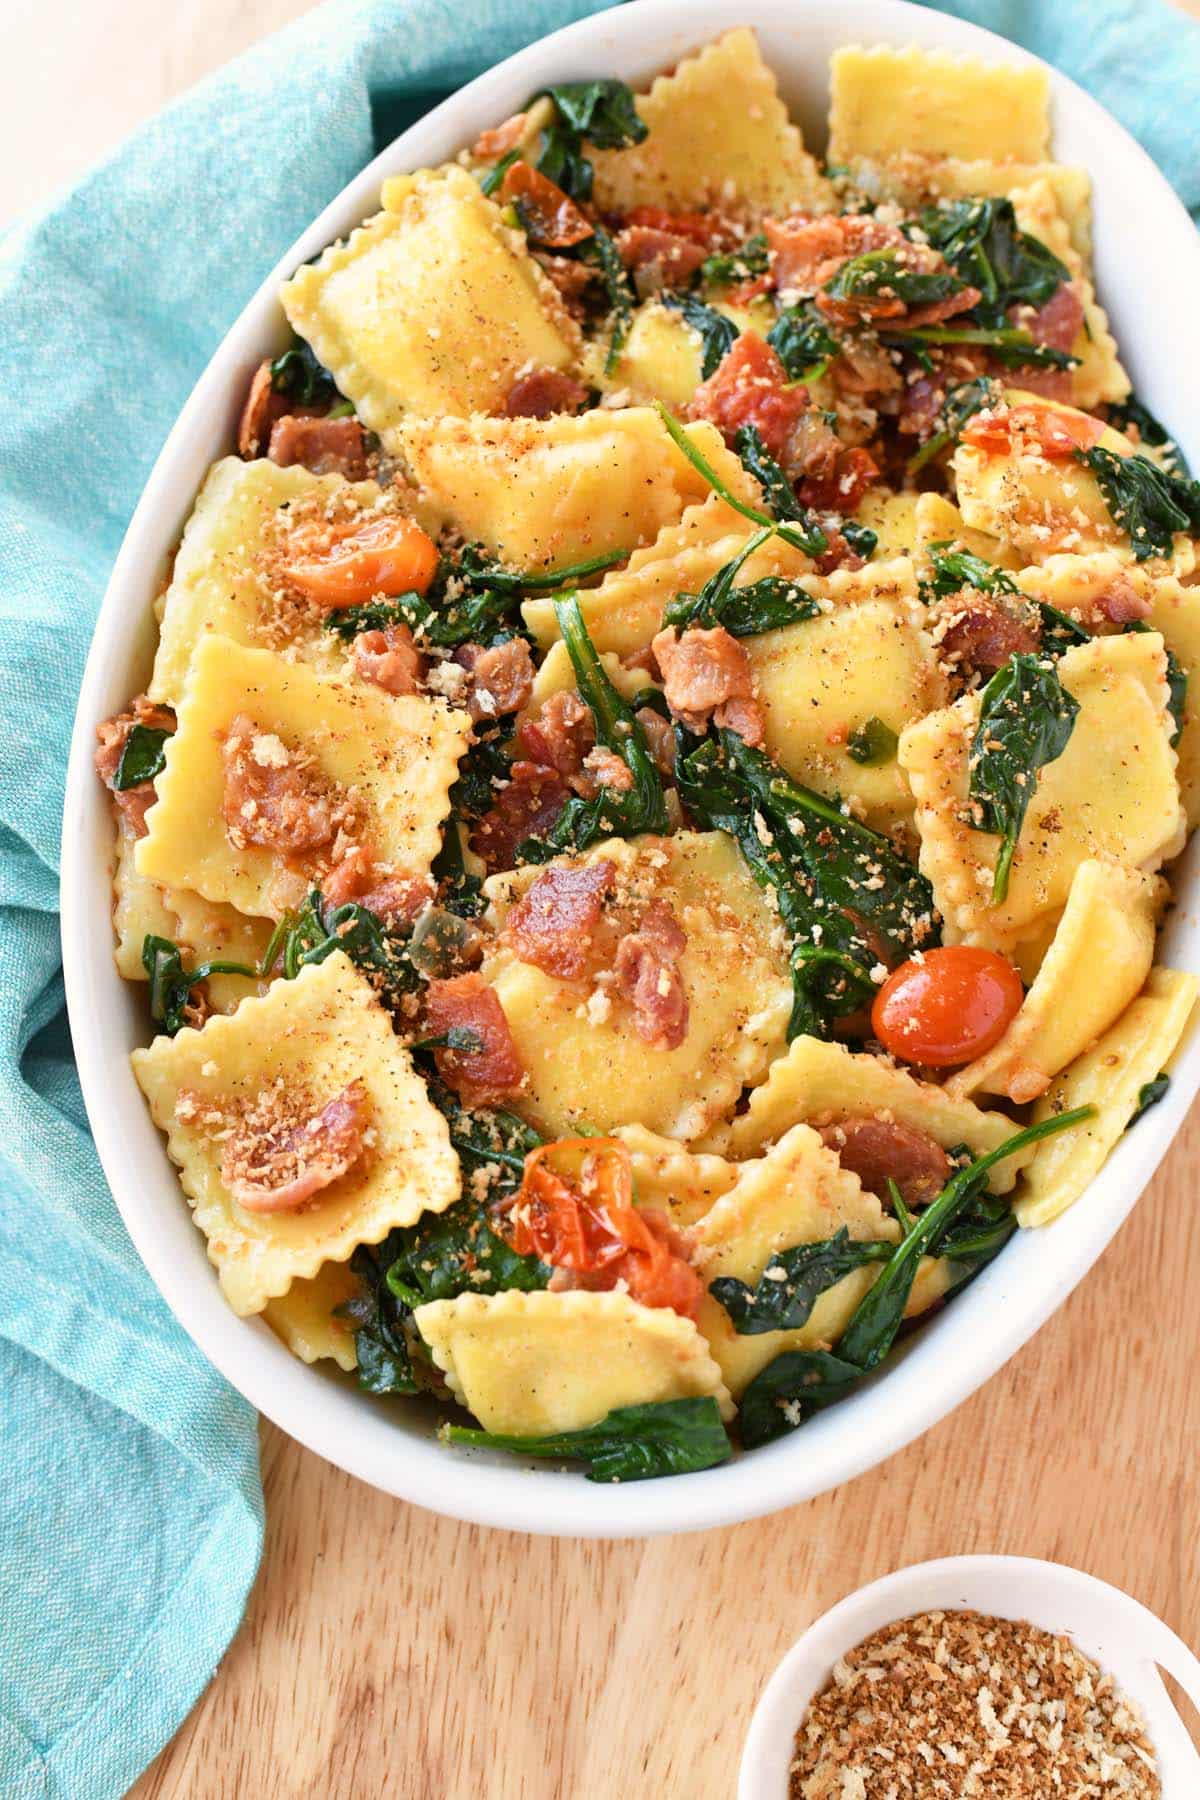 Spinach and tomato in ravioli in an oval dish.